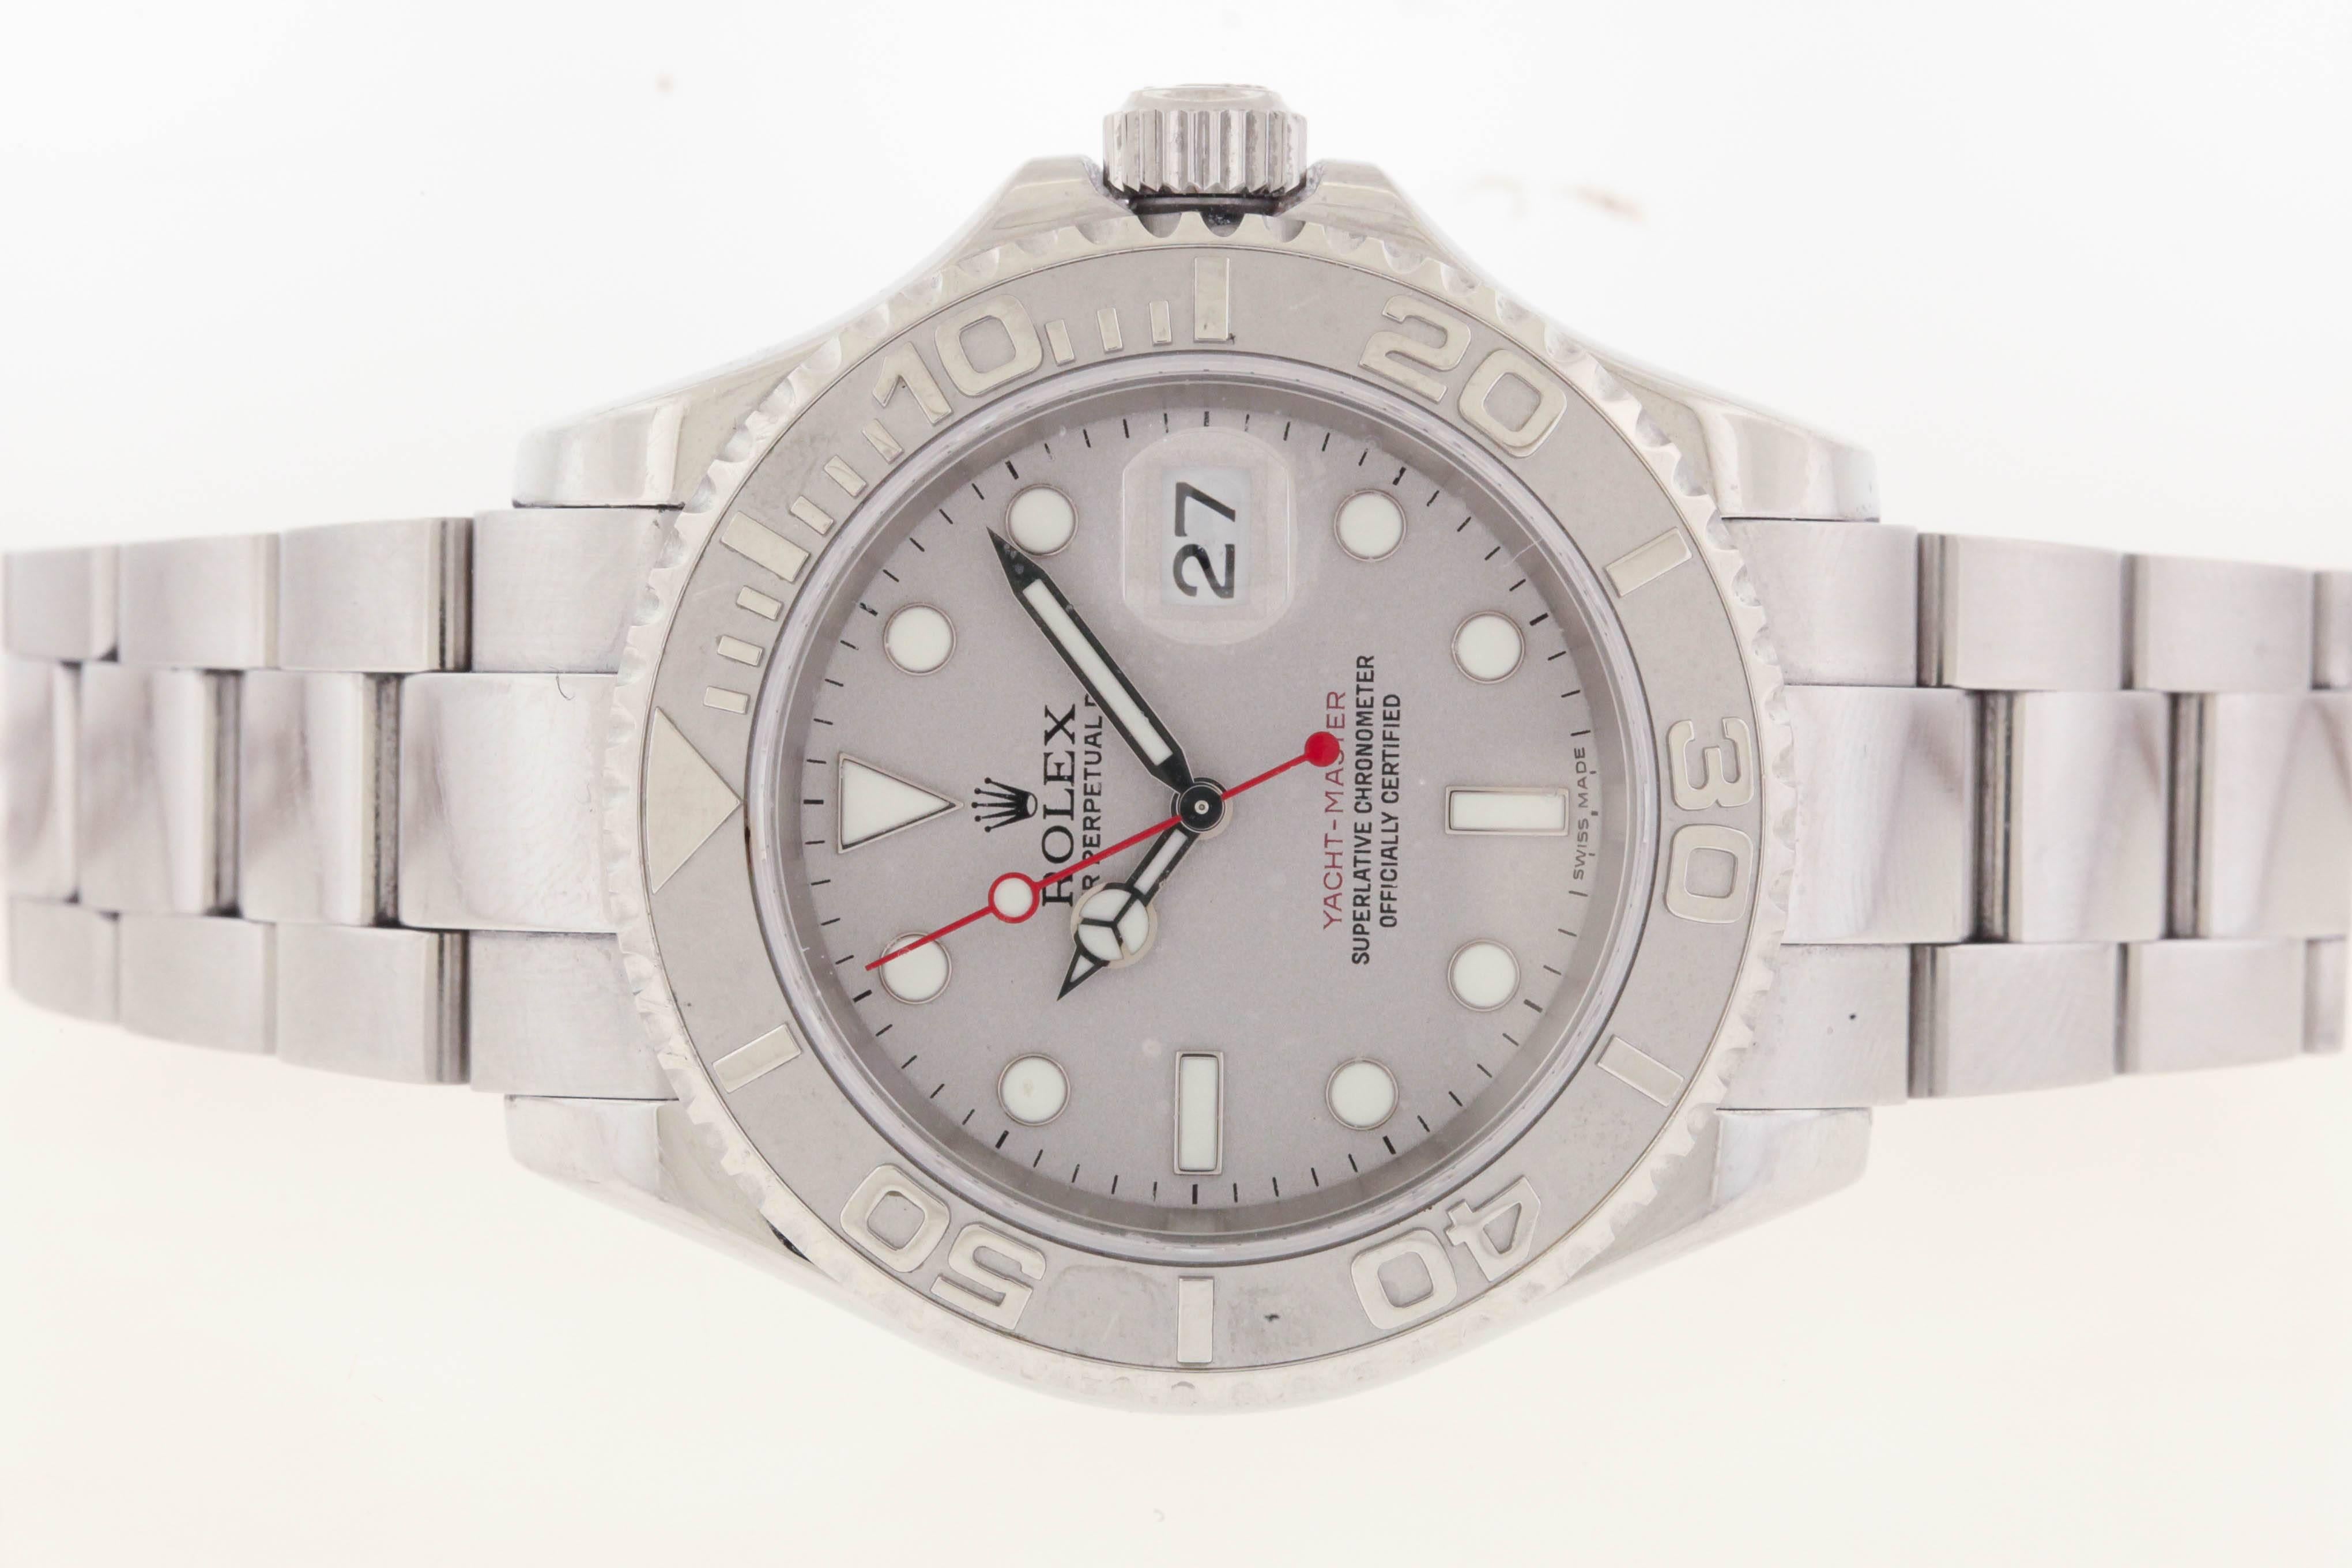 Stainless steel Rolex Yacht-Master Oyster Perpetual, circa 2006, Ref. 16622, is a 40mm self-winding water-resistant wristwatch with red center second sweep hand and date at 3 o'clock. The case has a screwed-down back, Rolex Oyster bracelet with